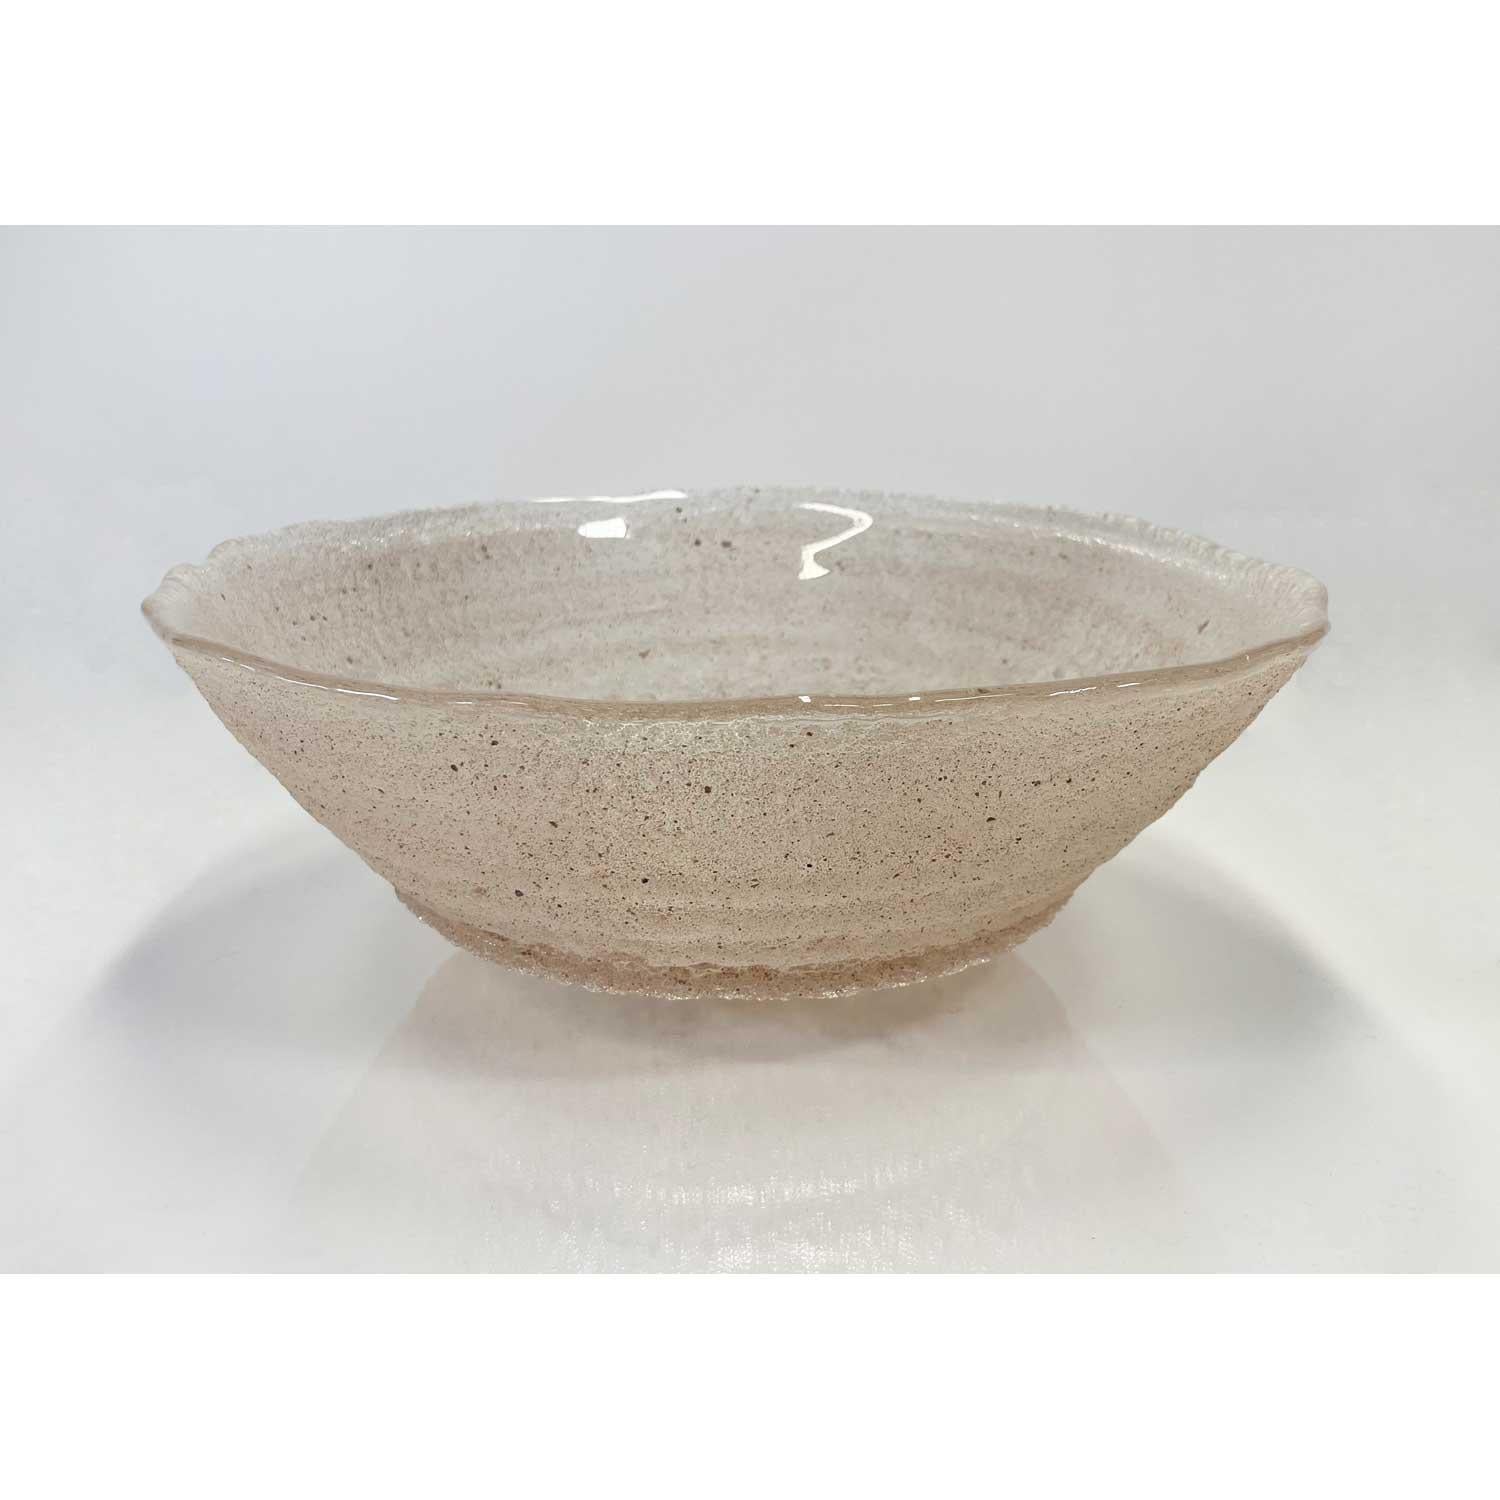 Andrew Beauchamp Abstract Sculpture - Sandcast Bowl